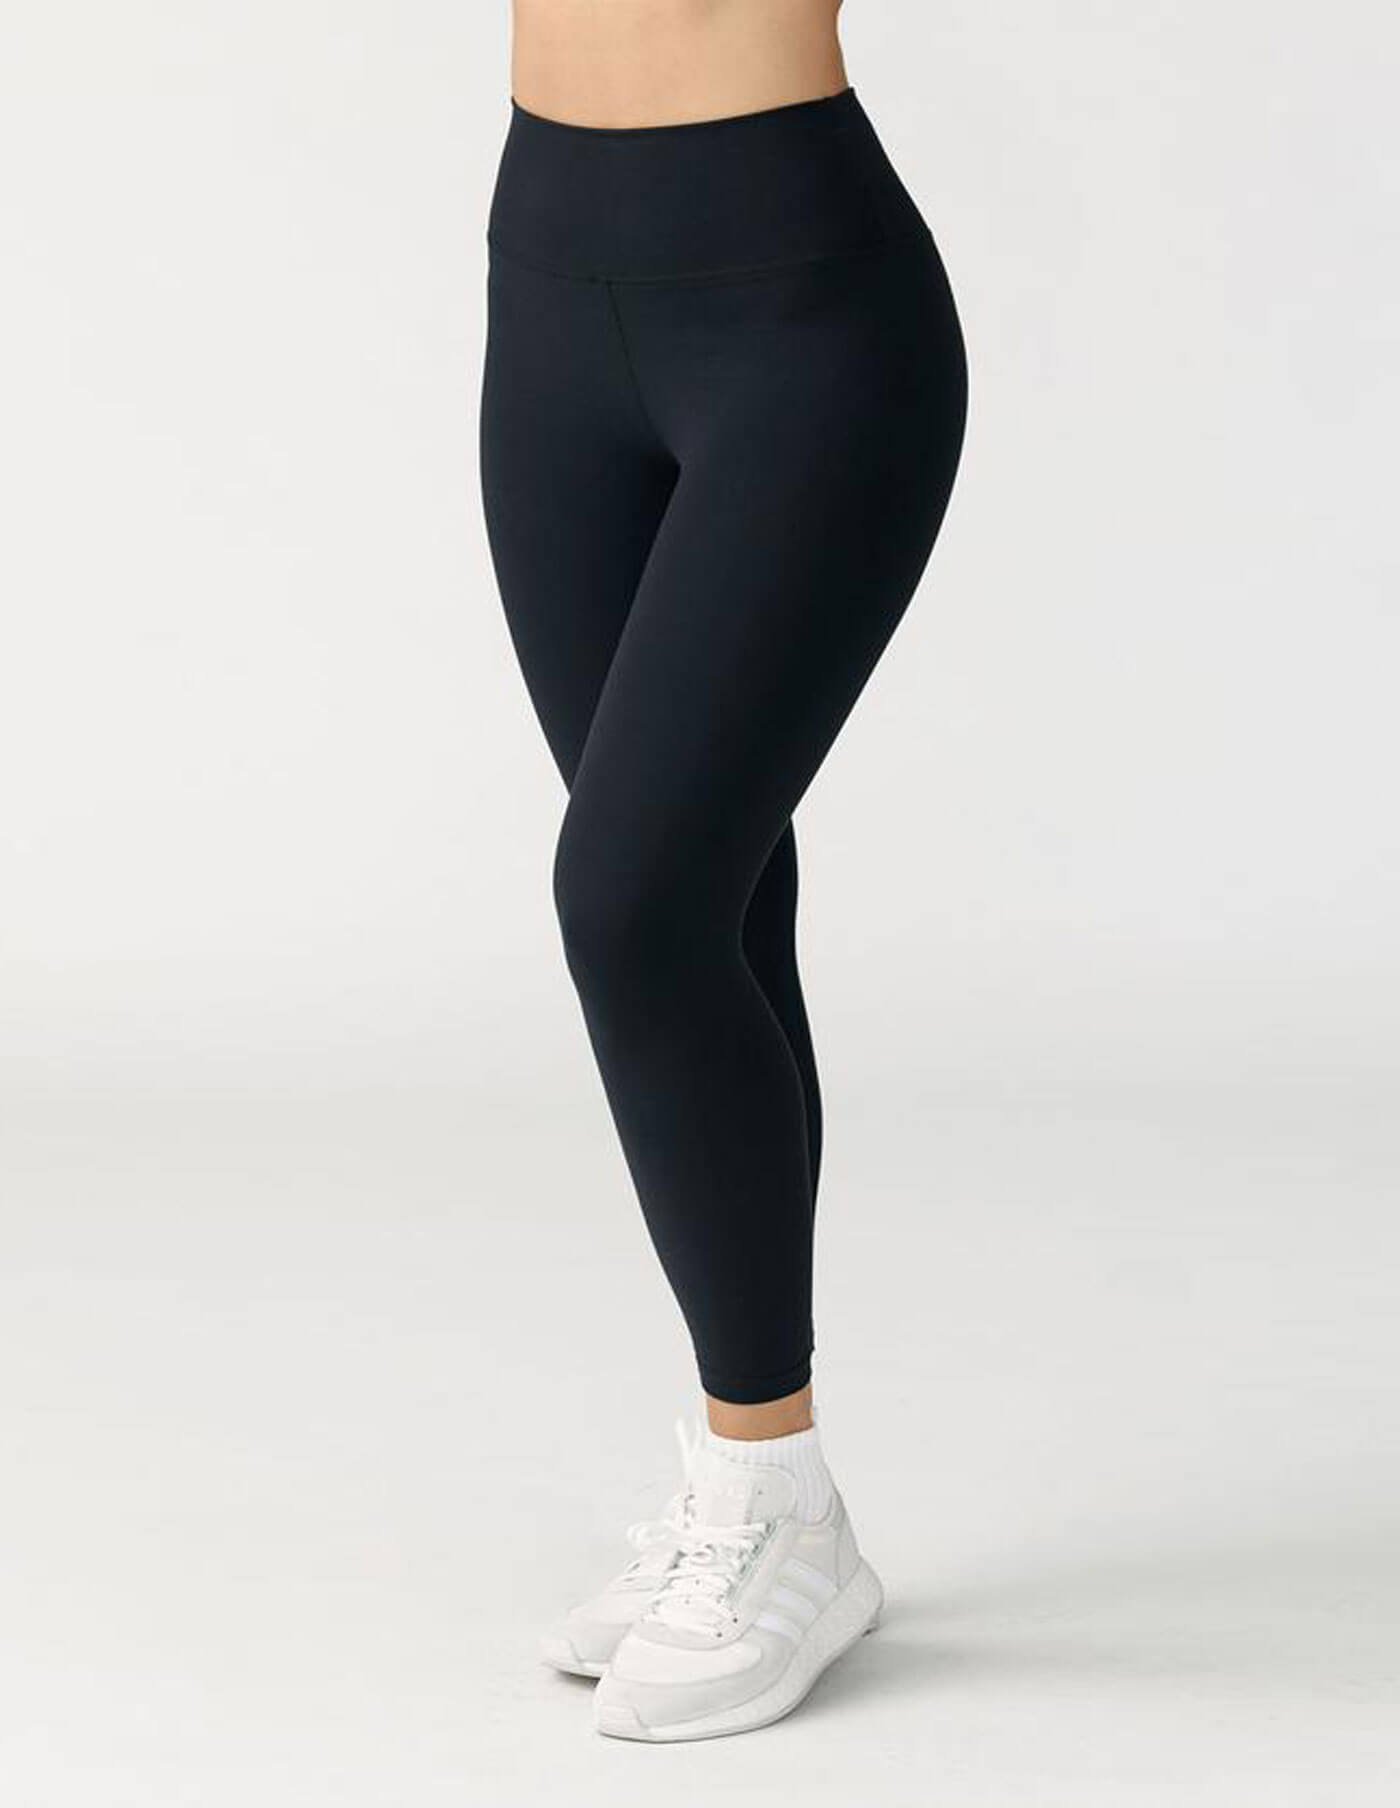 Joah Brown The Sports Legging Sueded 706LEG - Free Shipping at